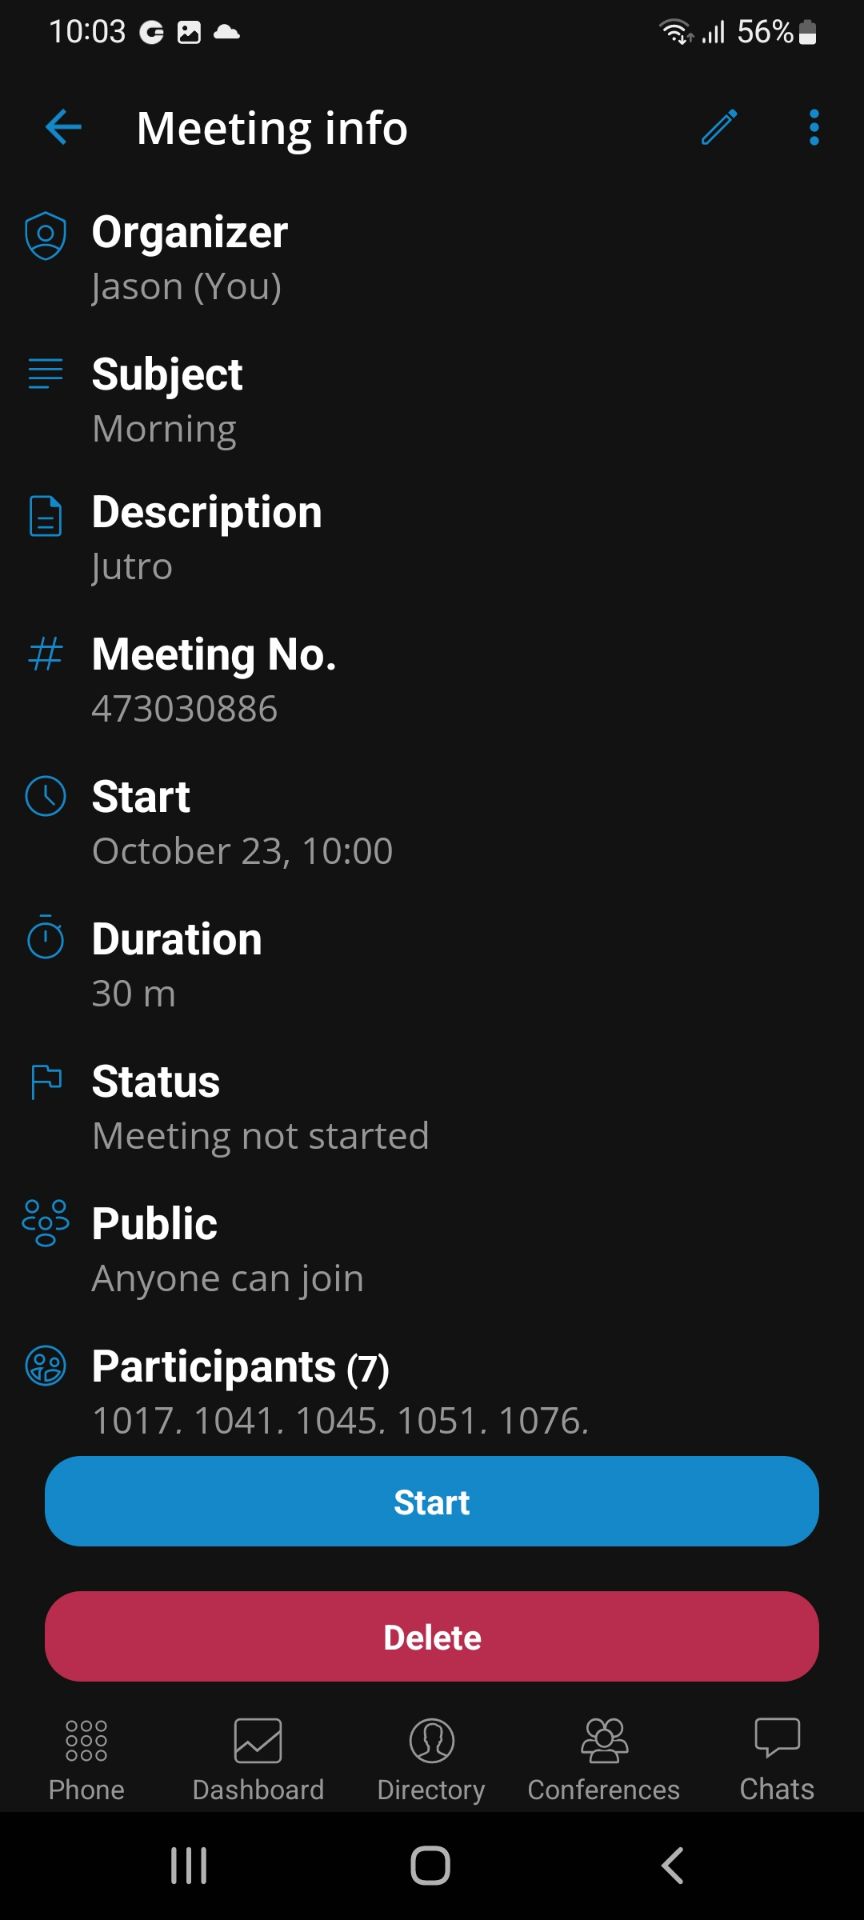 android-meeting-info-screen.jpg